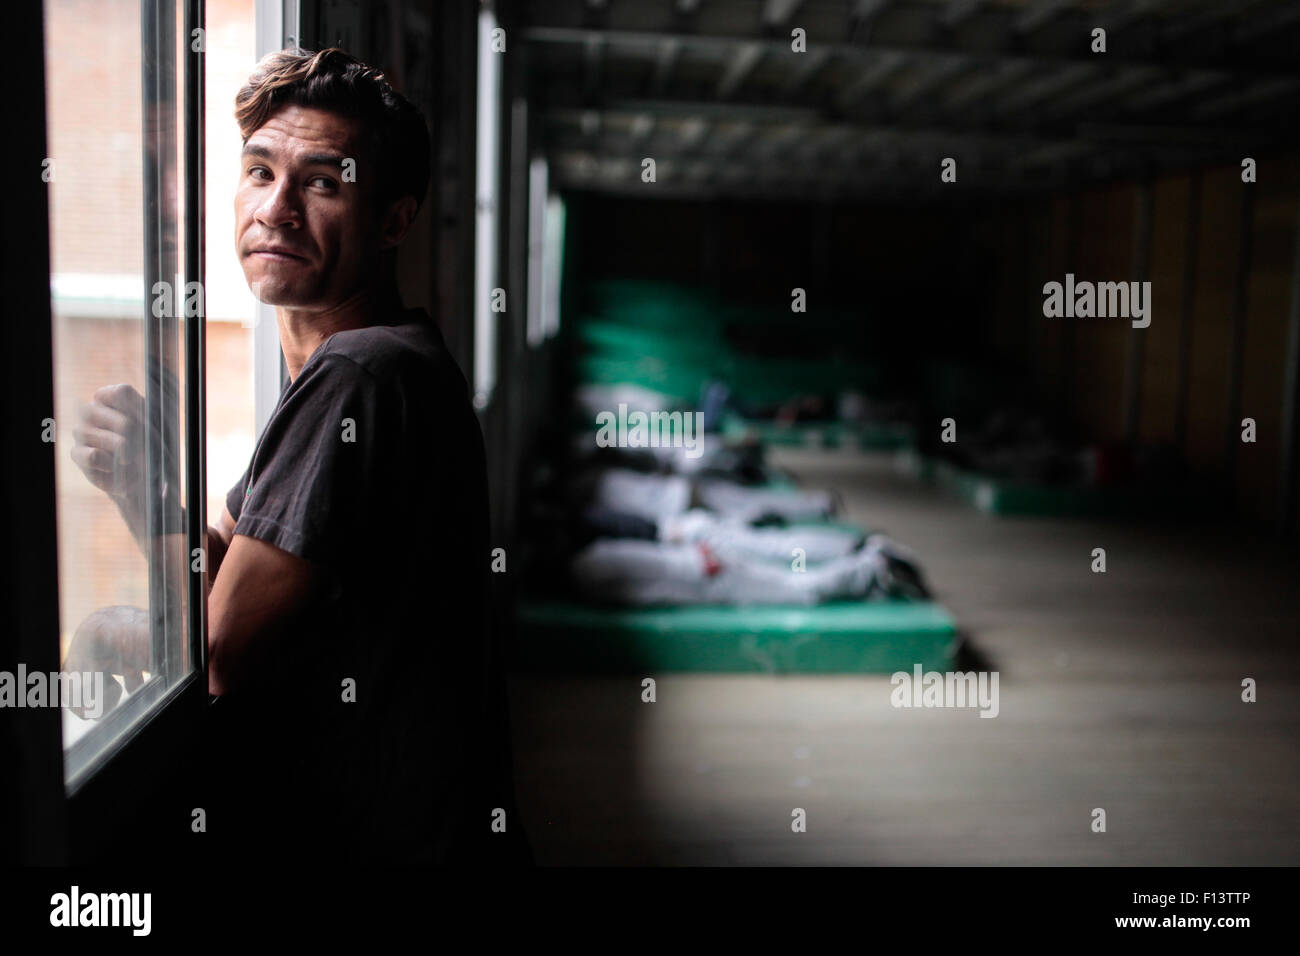 Bogota. 25th Aug, 2015. Image taken on Aug. 25, 2015 shows a homeless man standing at the Center for Self-Care 'Bakata' in Bogota, Colombia. According to local press, during the 2015, several shelters and special centers have been opened in order to provide protection and a better quality of life to people in the streets. According to the latest data from the District Department of Social Integration, Bogota has a population of about 9,000 people homeless. © John Paz/Xinhua/Alamy Live News Stock Photo